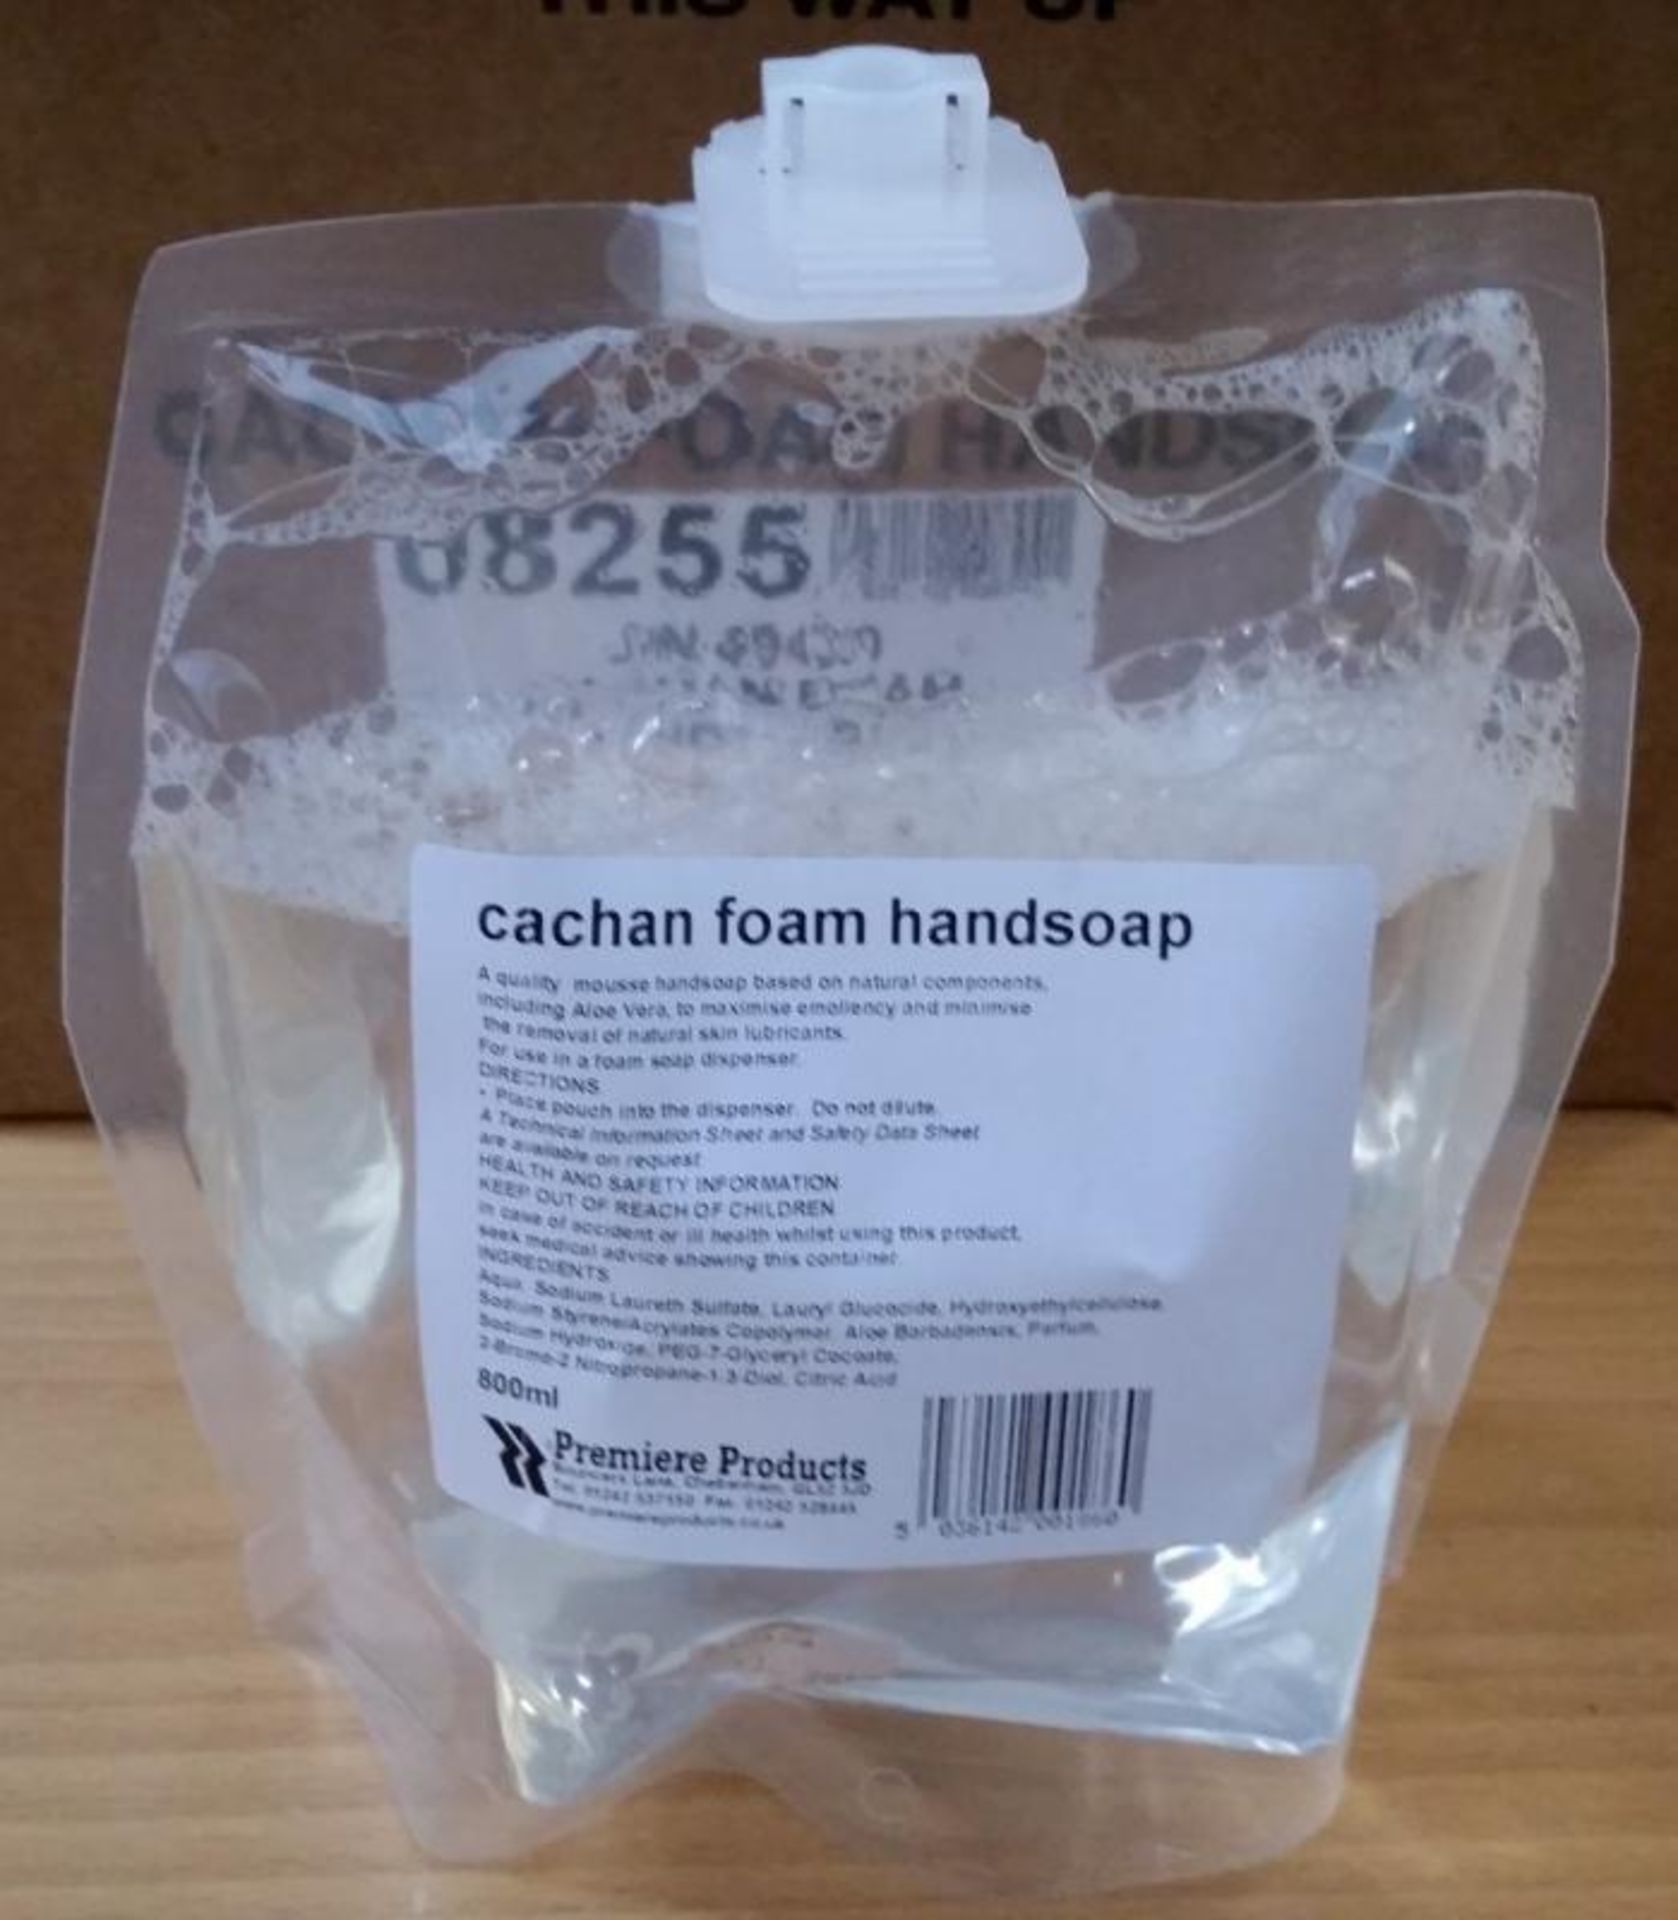 4 x Cachan Foam 800ml Handwash - Suitable For Foaming Dispnesers - Expiry December 2018 - New Boxed